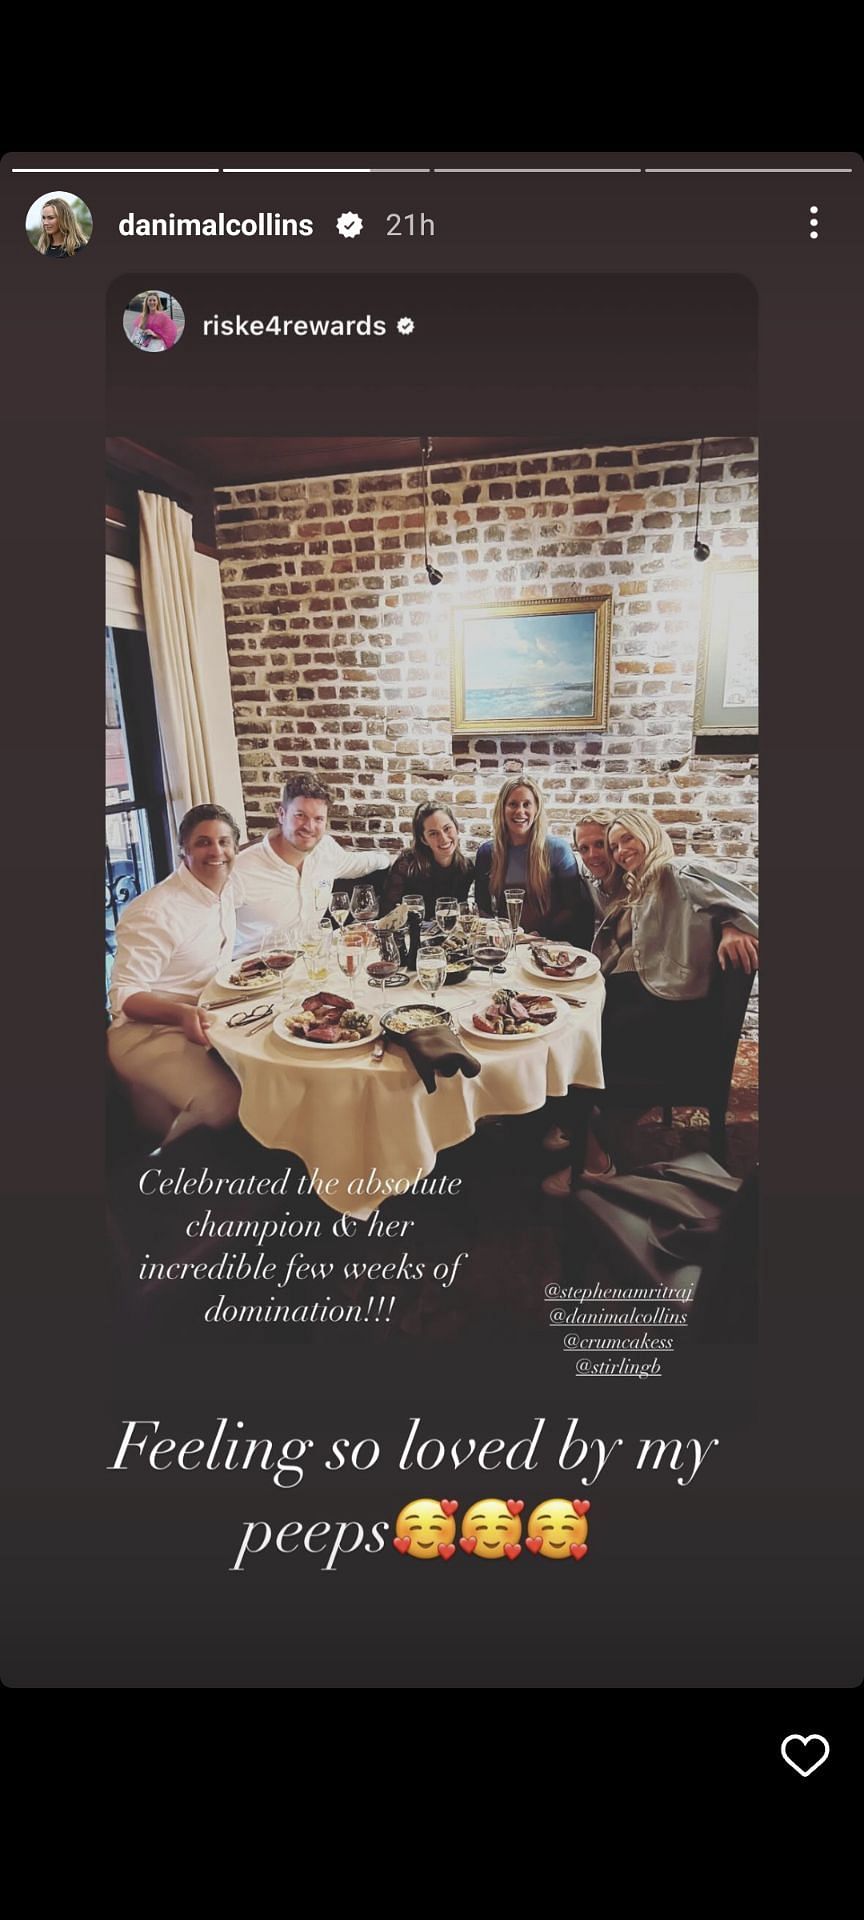 Danielle Collins&#039; Instagram post showing her celebrating her Charleston Open triumph with Alison-Riske Amritraj, Stephen Amritraj, and others